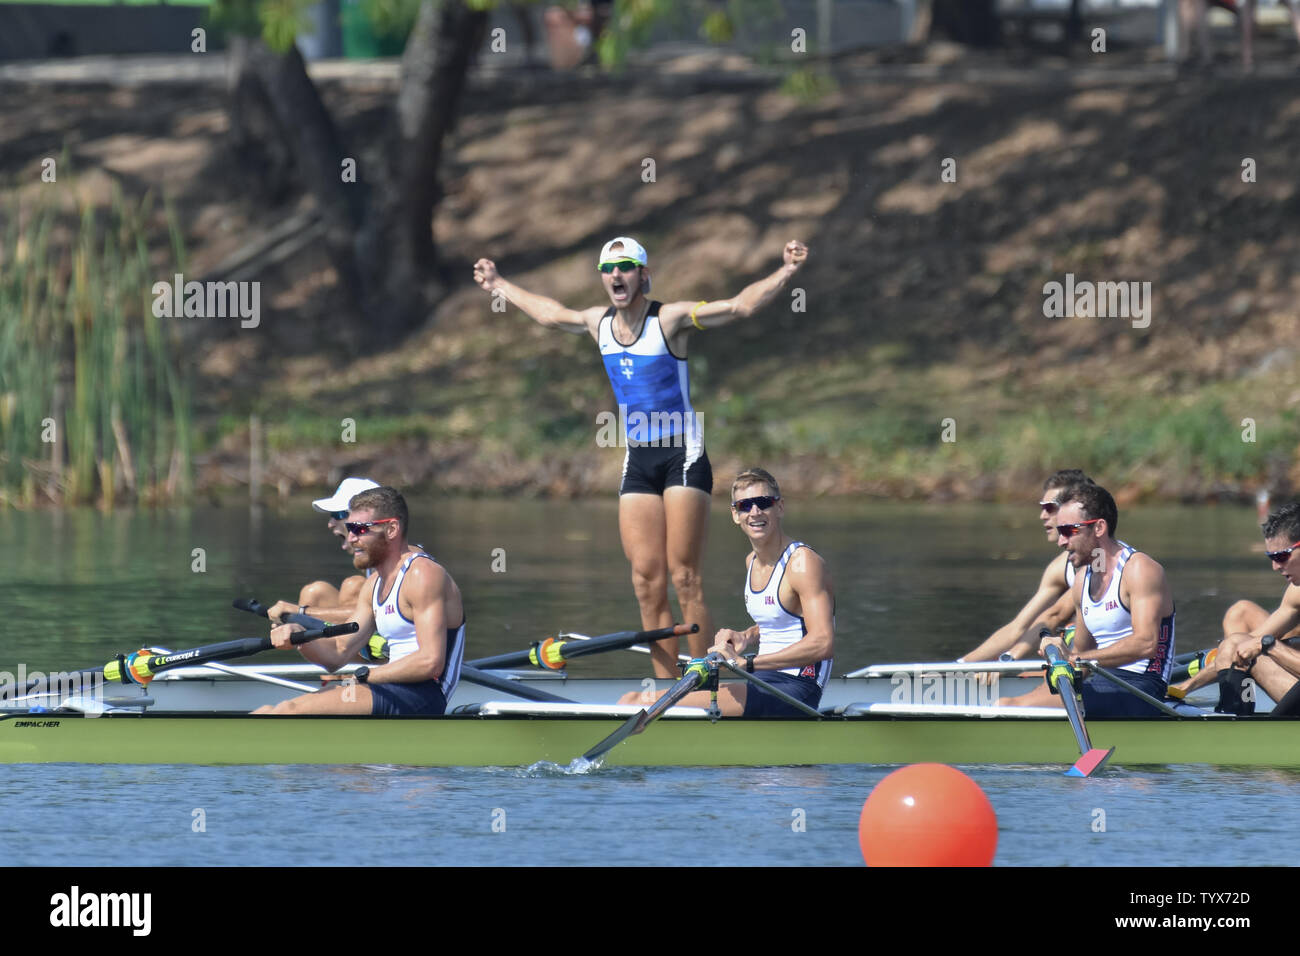 Panagiotis Magdanis, Stefanos Ntouskos, Loannis Petrou, and Spyridon Christos of Greece, celebrate after qualifying for the final round in the Men's coxless lightweight four semifinal heat during the 2016 Summer Olympics in Rio de Janeiro, Brazil, August 9, 2016. Greece came in third behind Switzerland and Denmark.   Photo by Richard Ellis/UPI Stock Photo